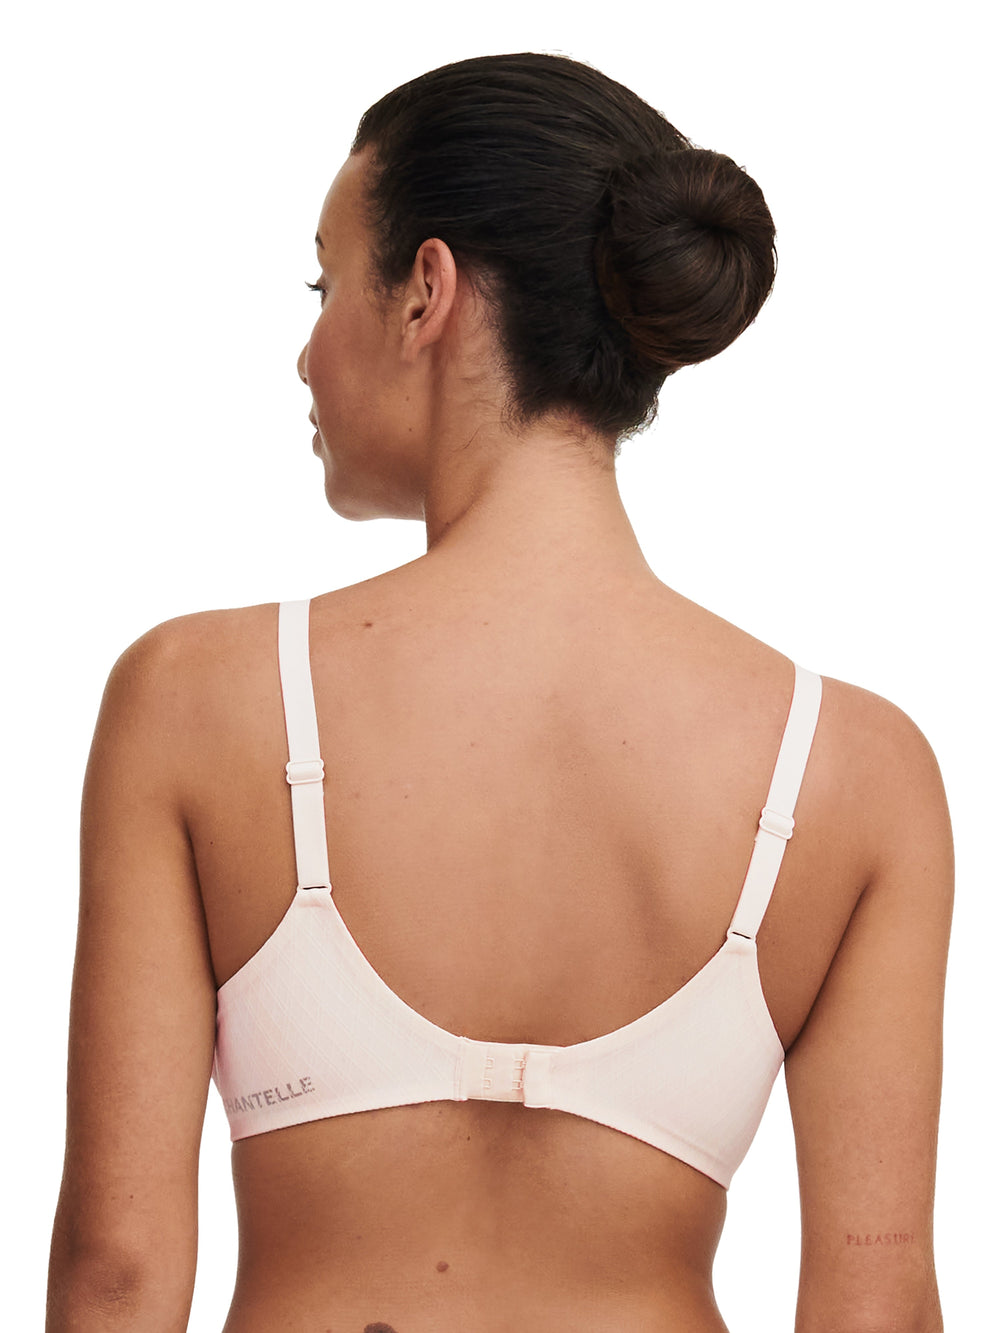 Chantelle Smooth Lines Very Covering Molded Bra - Pearl Full Cup Bra Chantelle 